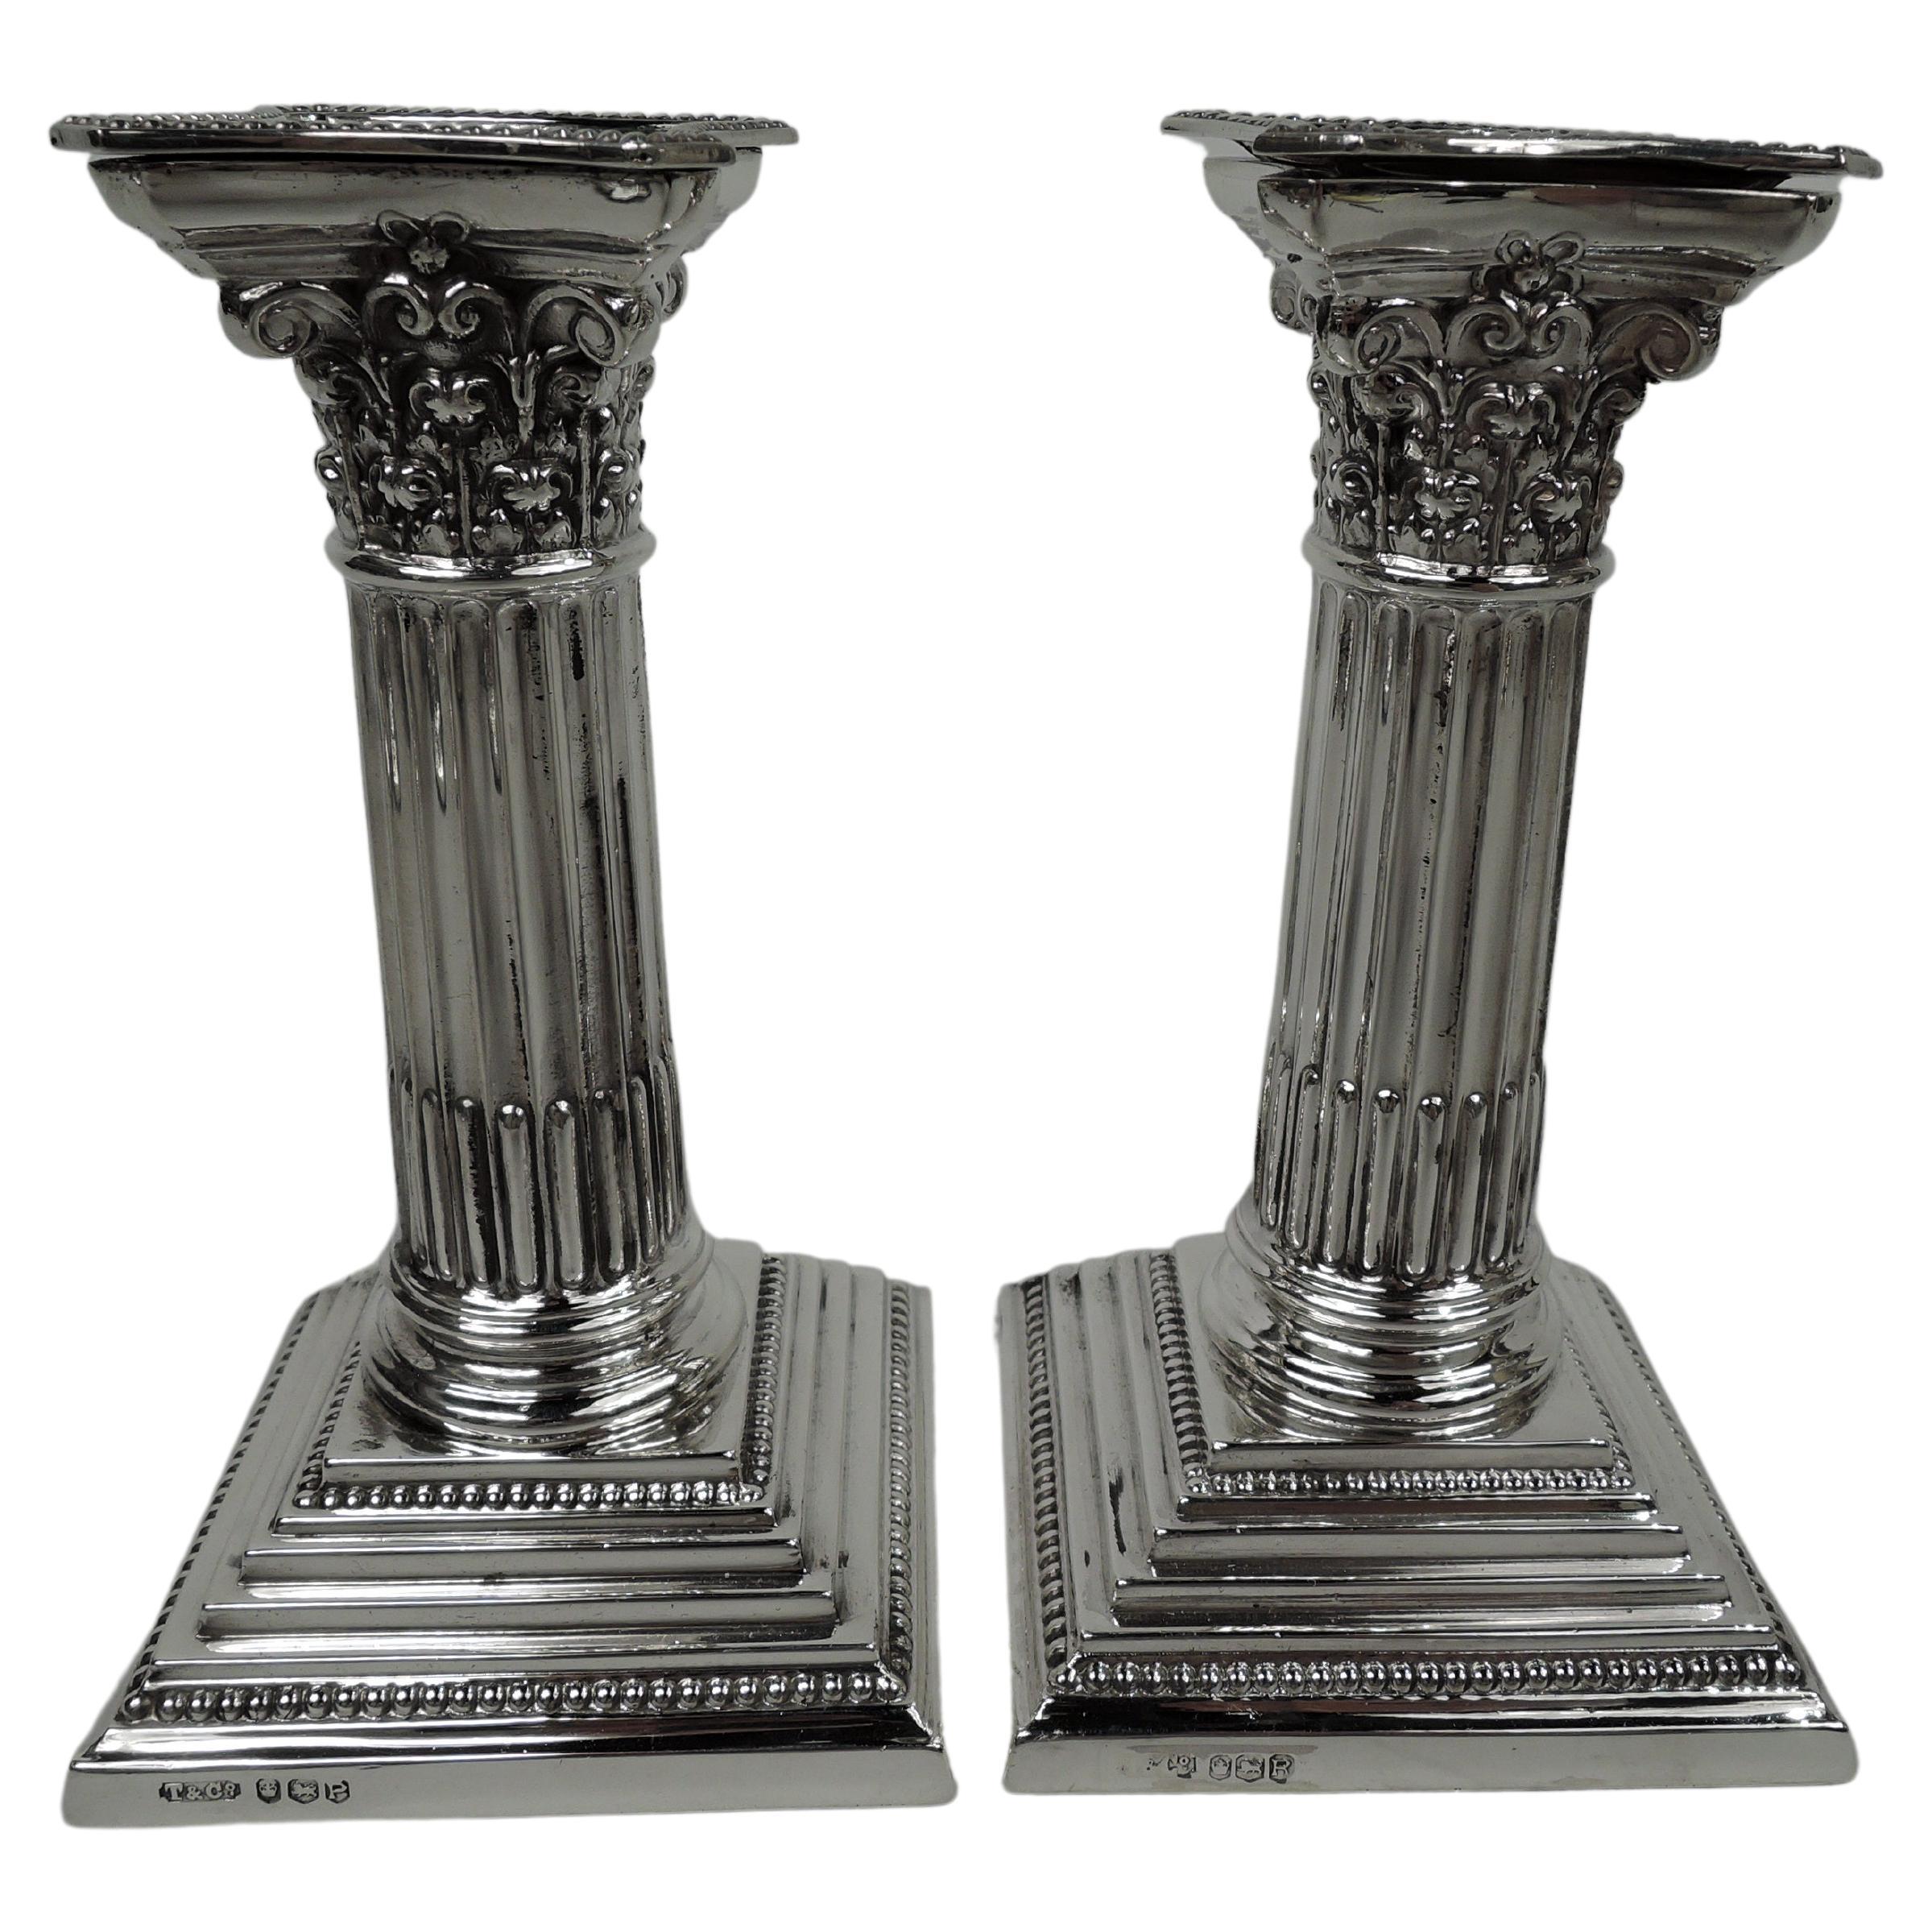 Pair of Tiffany Traditional English Neoclassical Column Candlesticks